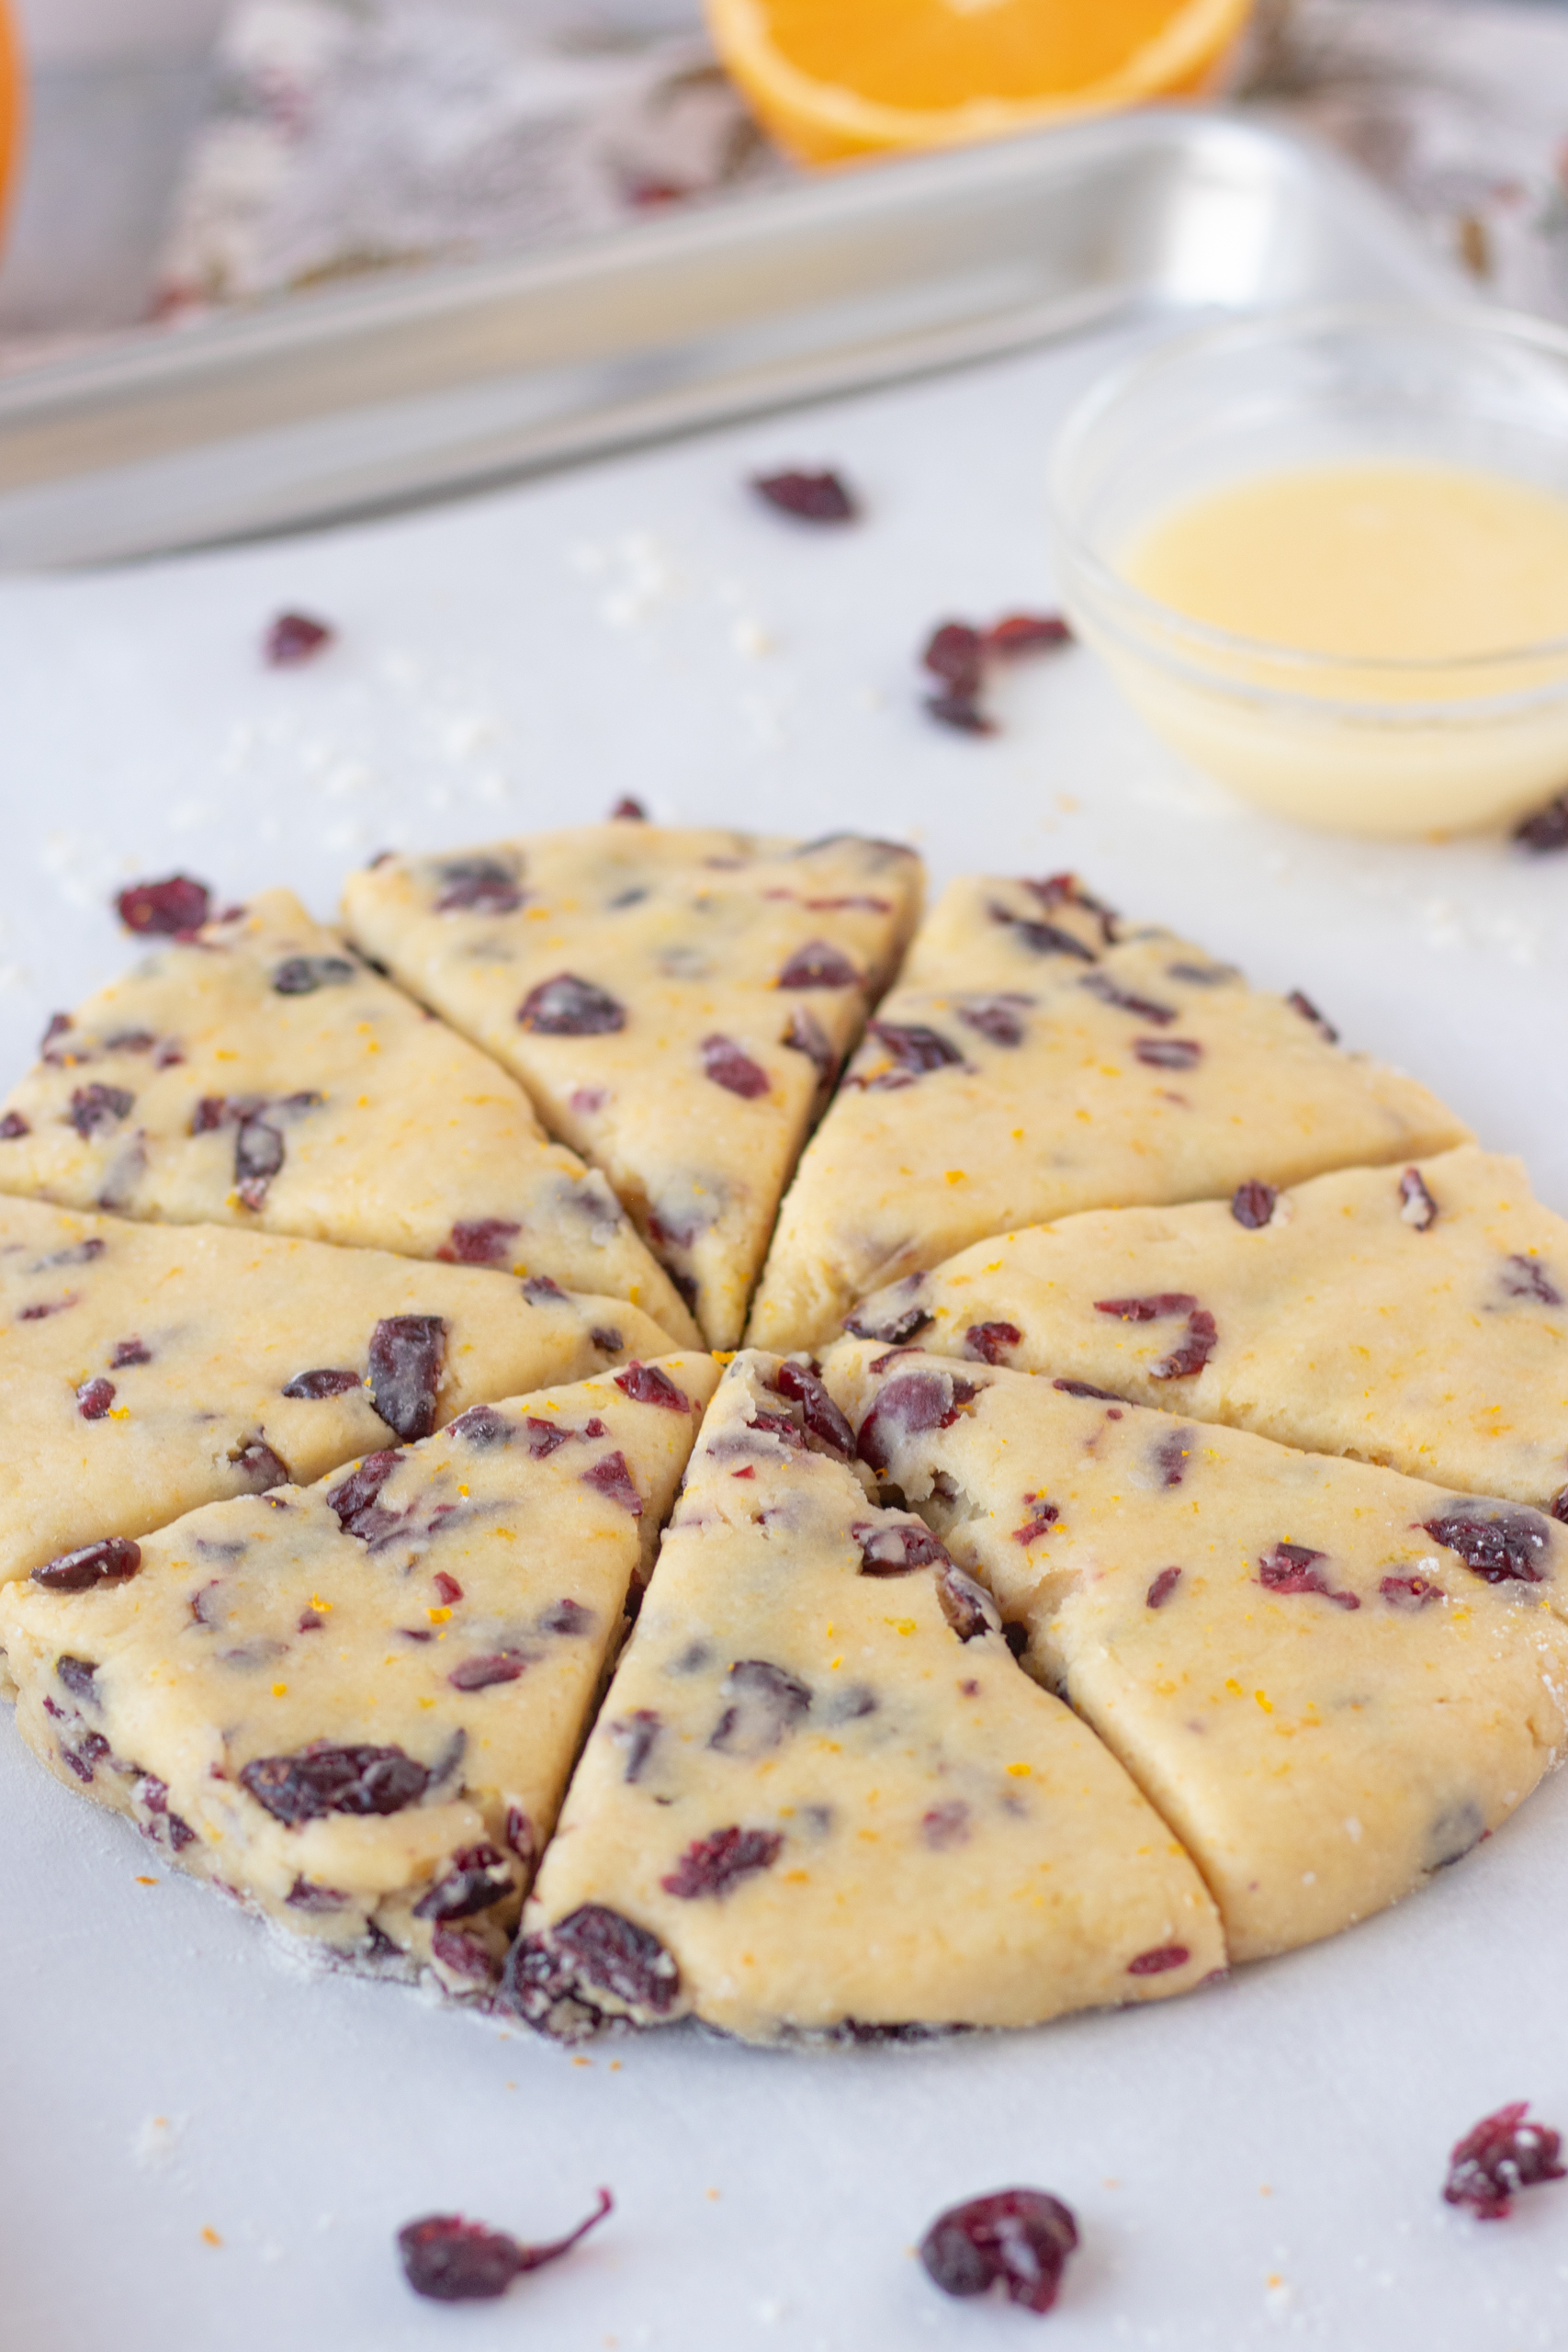 These Cranberry Orange Scones are buttery, crumbly, and light. They are full of flavor and will melt in your mouth! The tartness of the cranberries balances out the sweet orange, and they're a perfect addition for your tea or breakfast! Don’t forget the sweet orange glaze! via @foodhussy